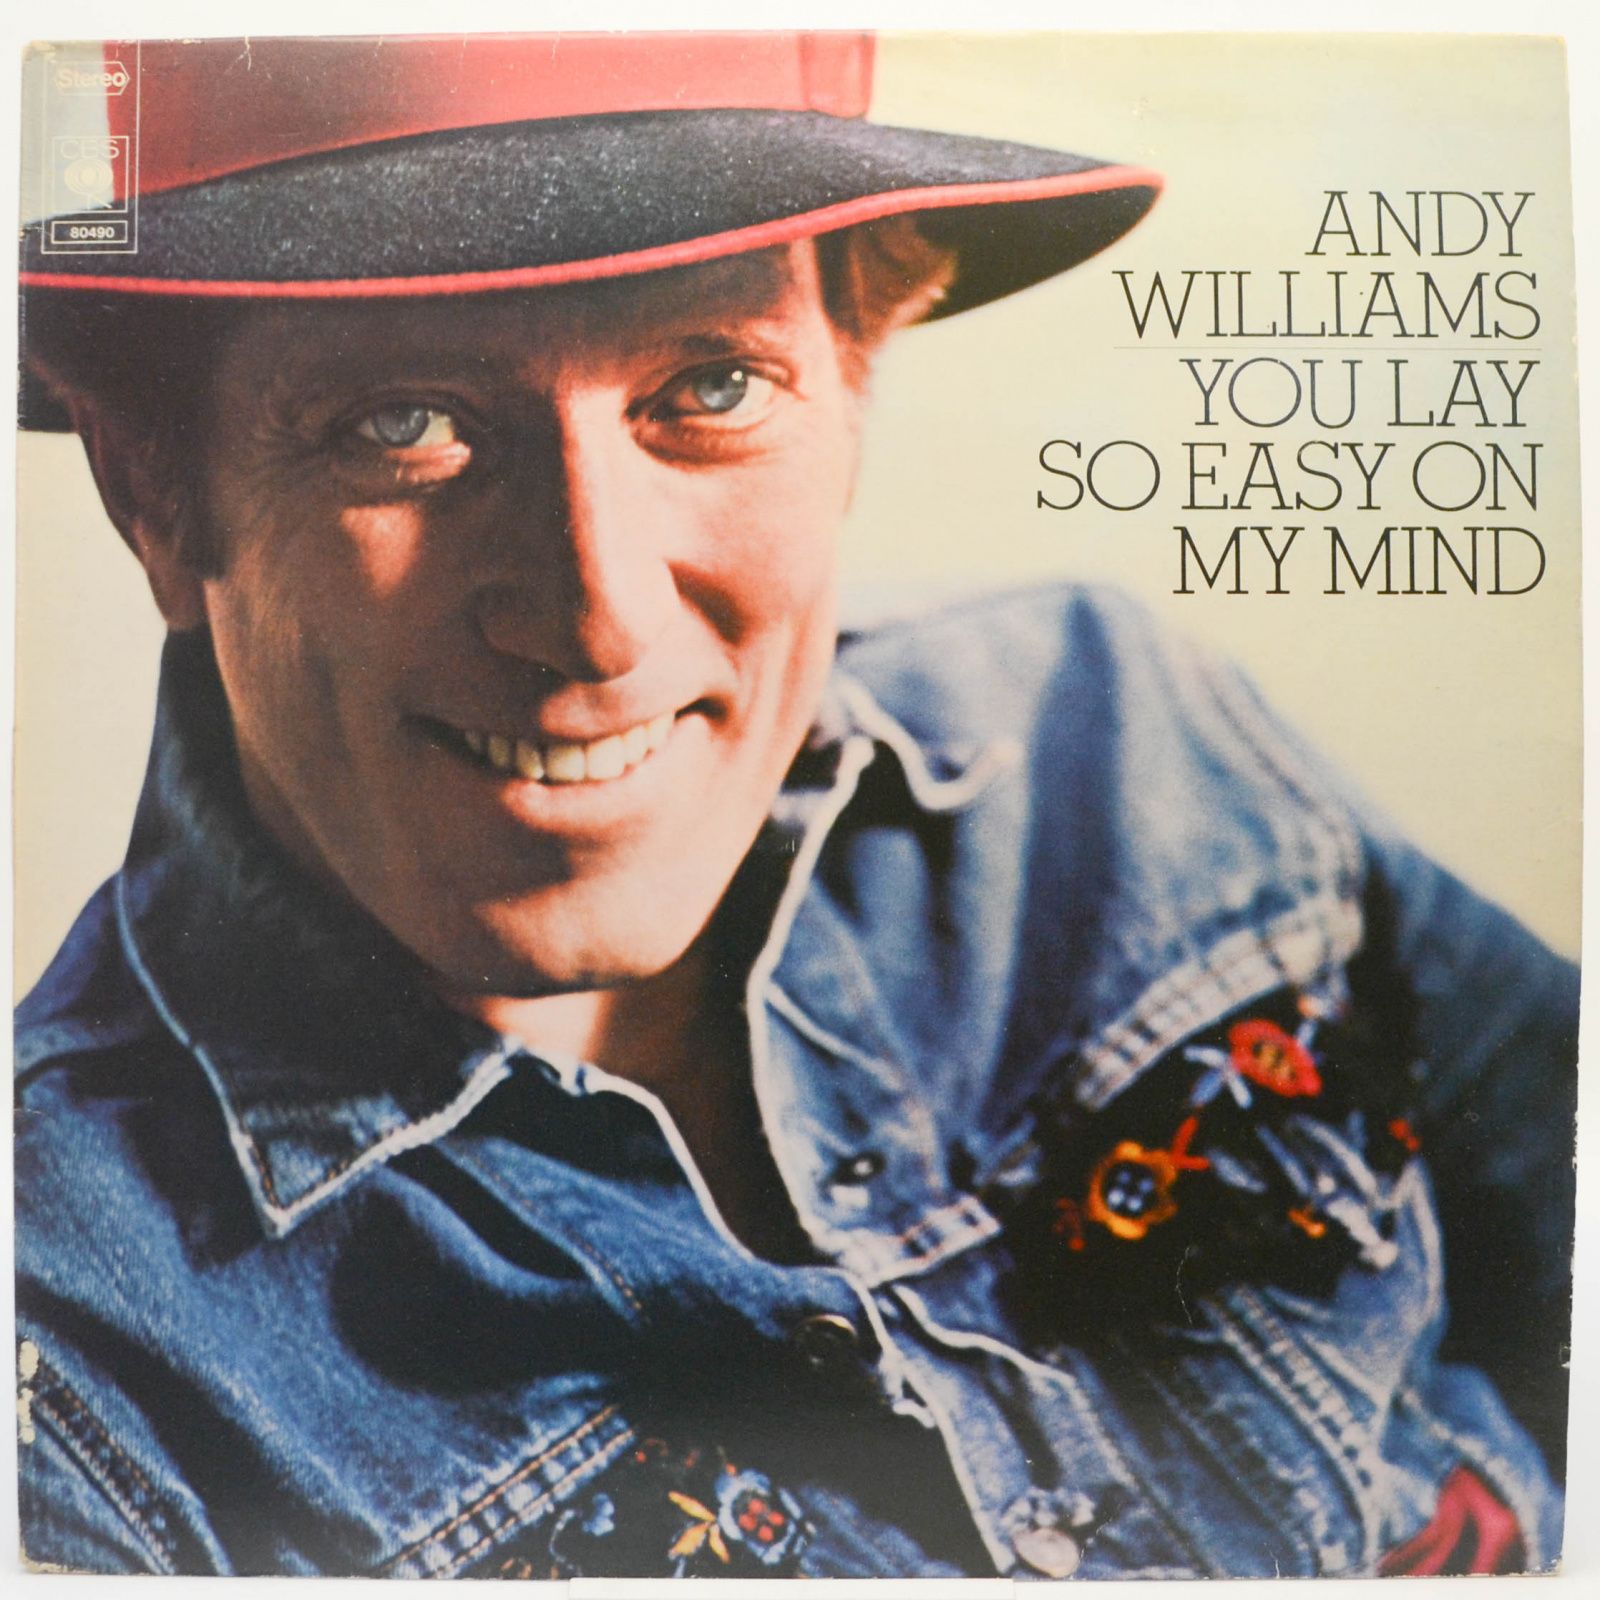 Andy Williams — You Lay So Easy On My Mind, 1974